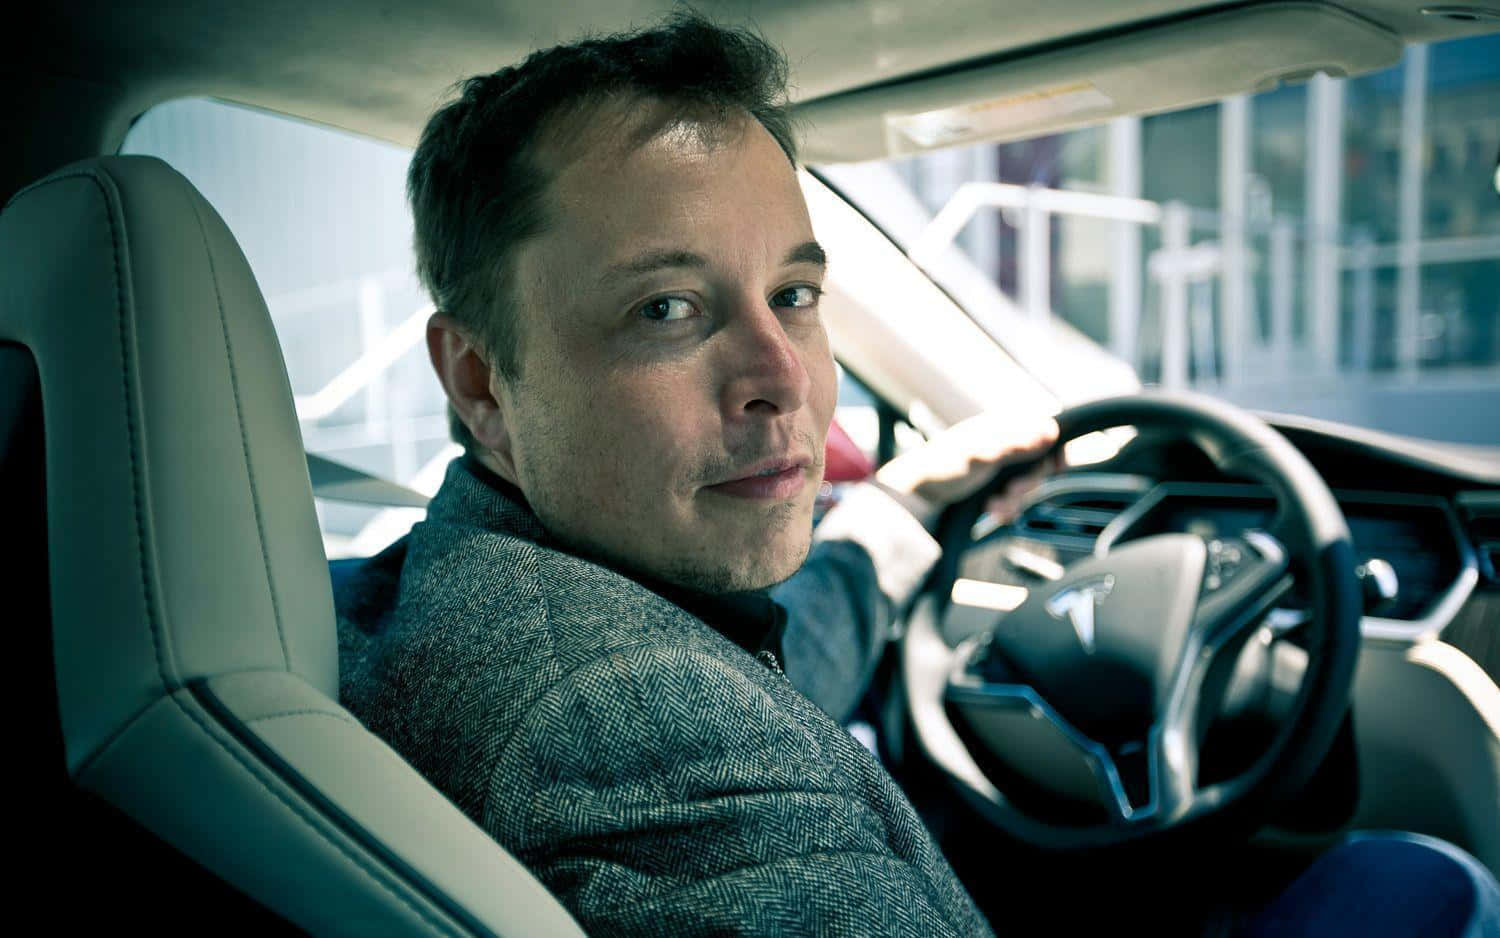 Elon Musk, CEO of Tesla and SpaceX